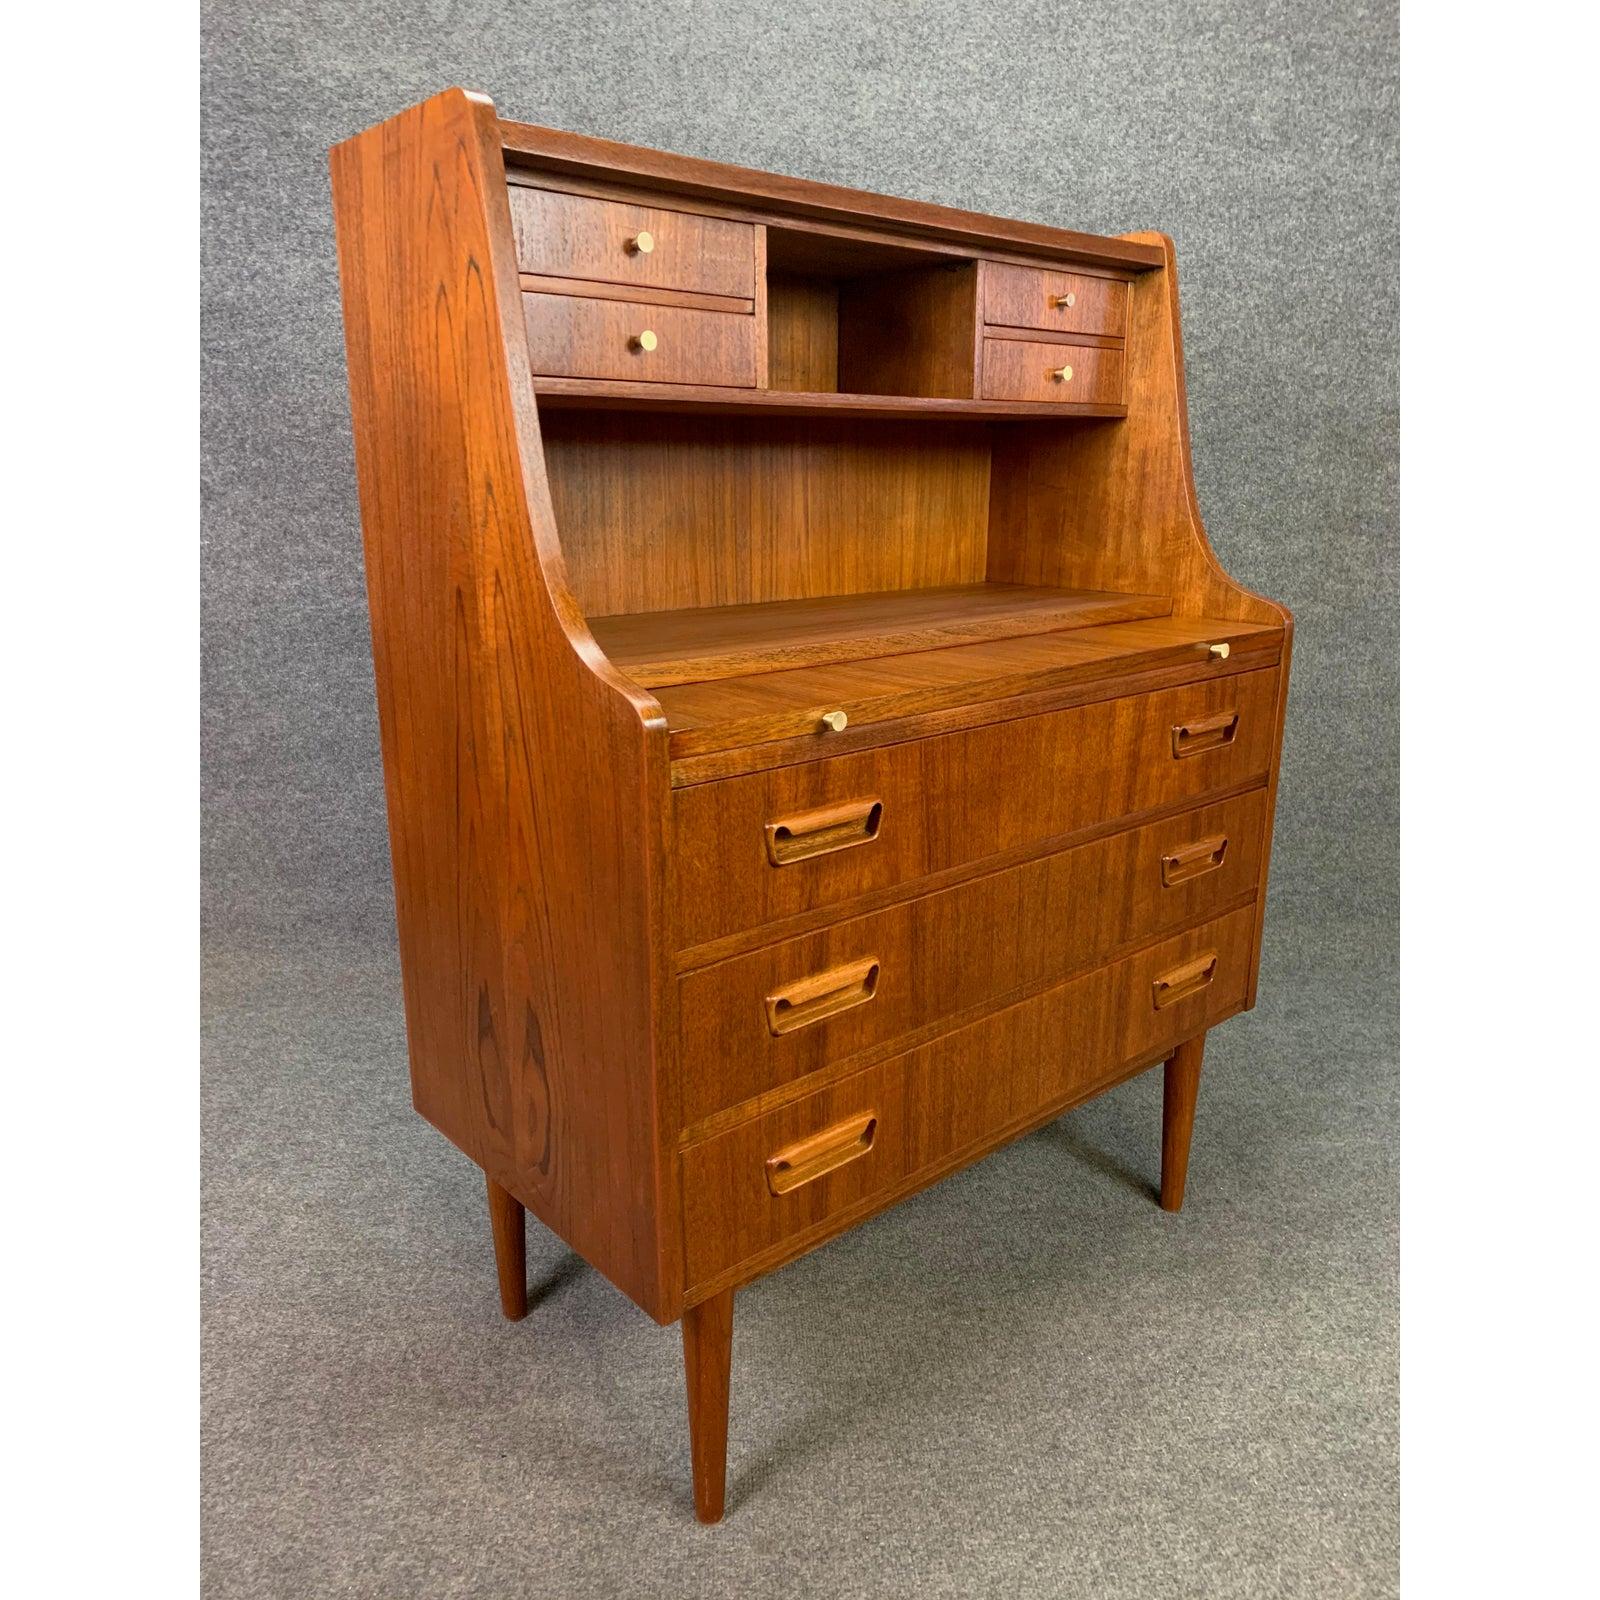 Here is a beautiful Scandinavian Modern teak secretary desk designed by Gunnar Nielsen Tibergaard in Denmark in the 1960s.
This special piece, recently imported from Copenhagen to California before its refinishing, features a vibrant teak grain,